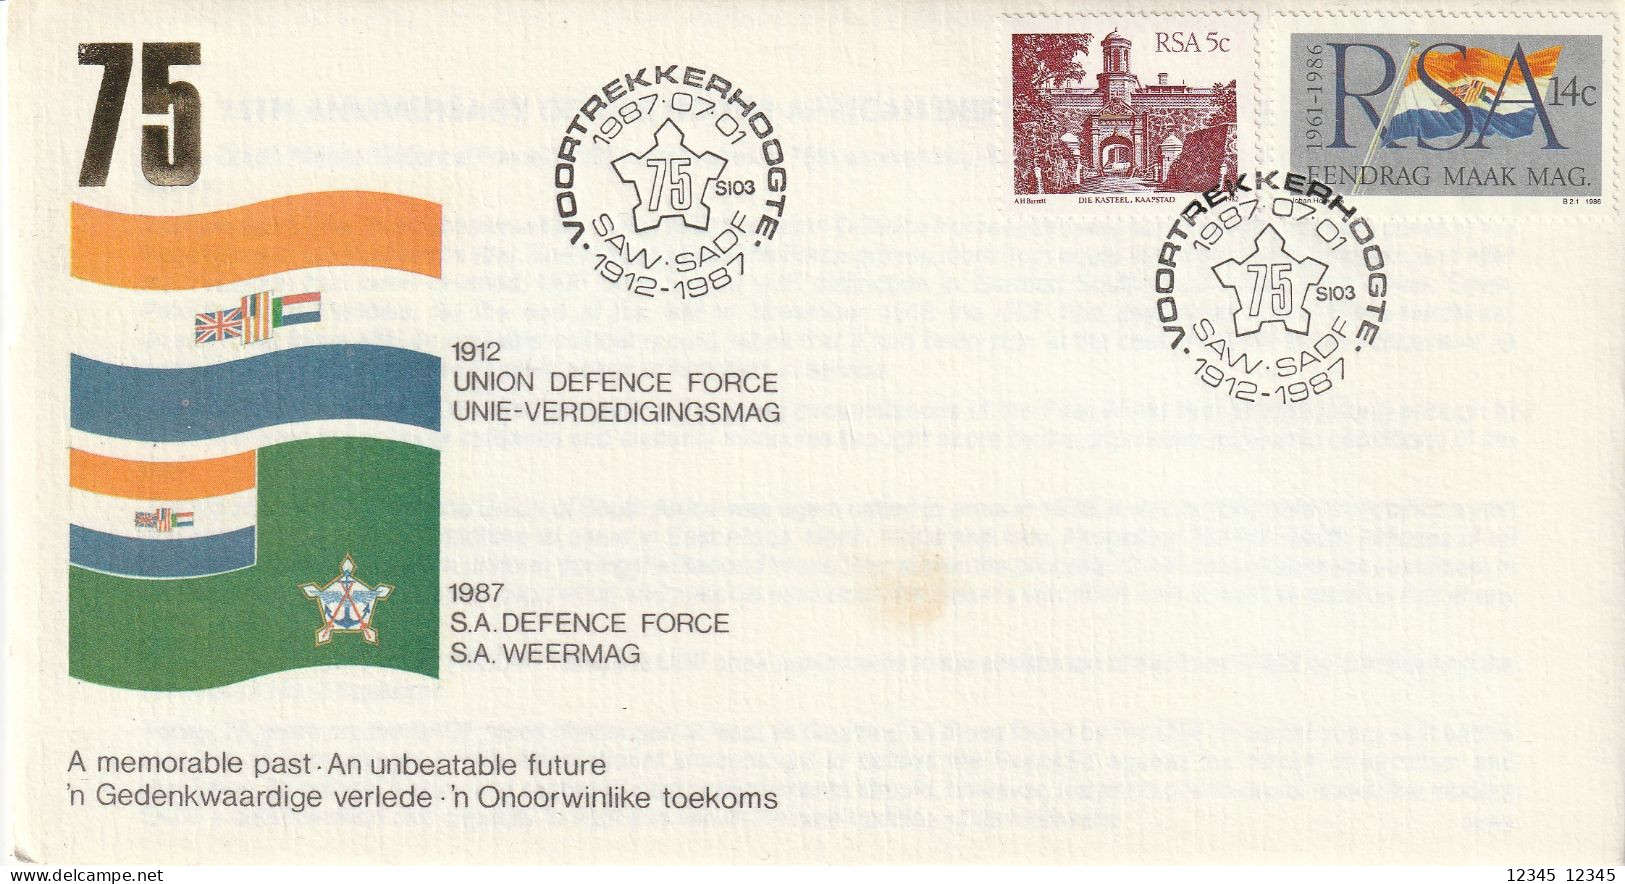 Zuid Afrika 1987, 1912 Union Defence Force 1987 S.A. Defence Force - Lettres & Documents